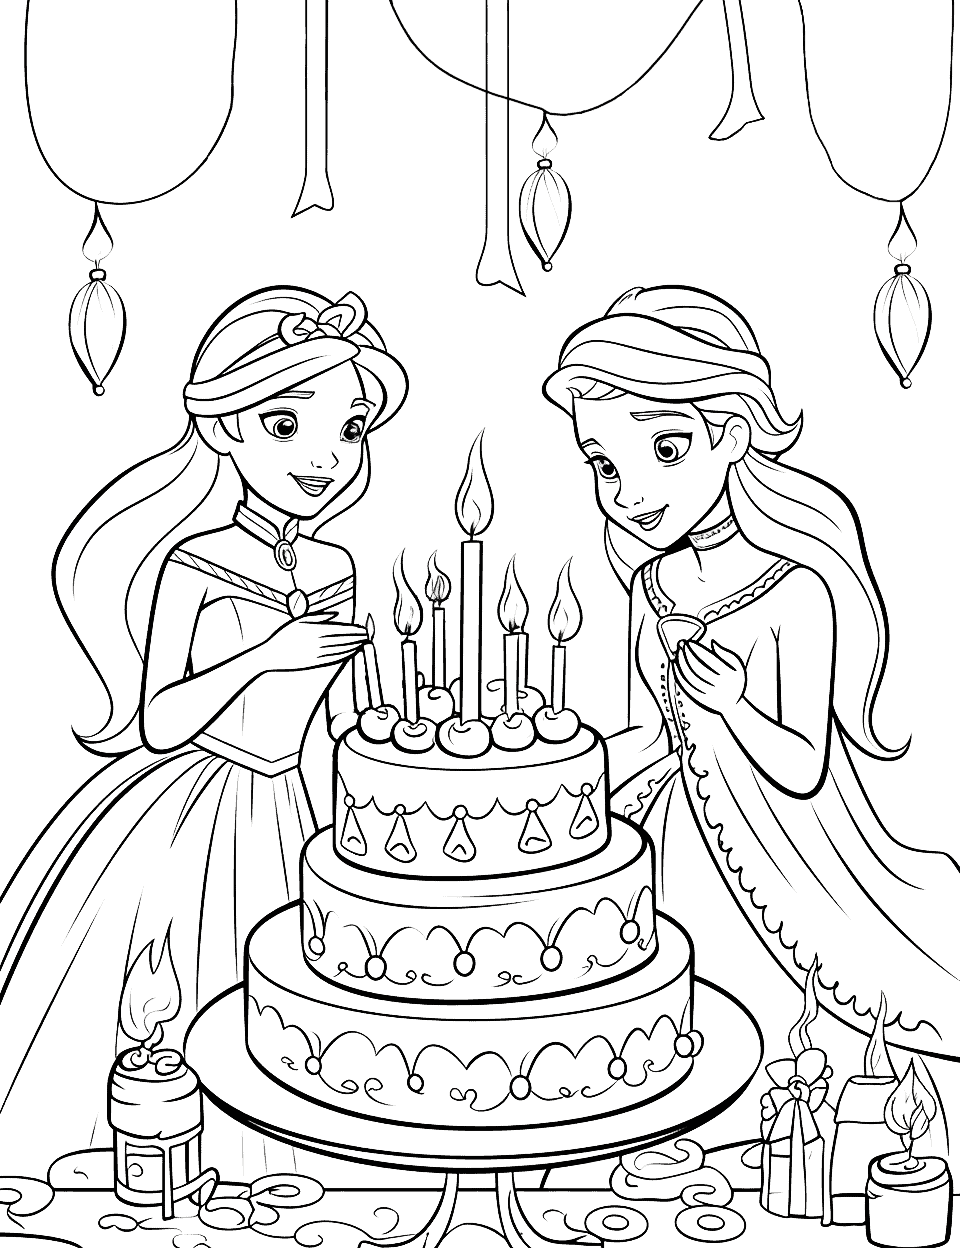 Frozen-themed Birthday Happy Coloring Page - Elsa and Anna preparing a birthday cake in their magical ice castle.